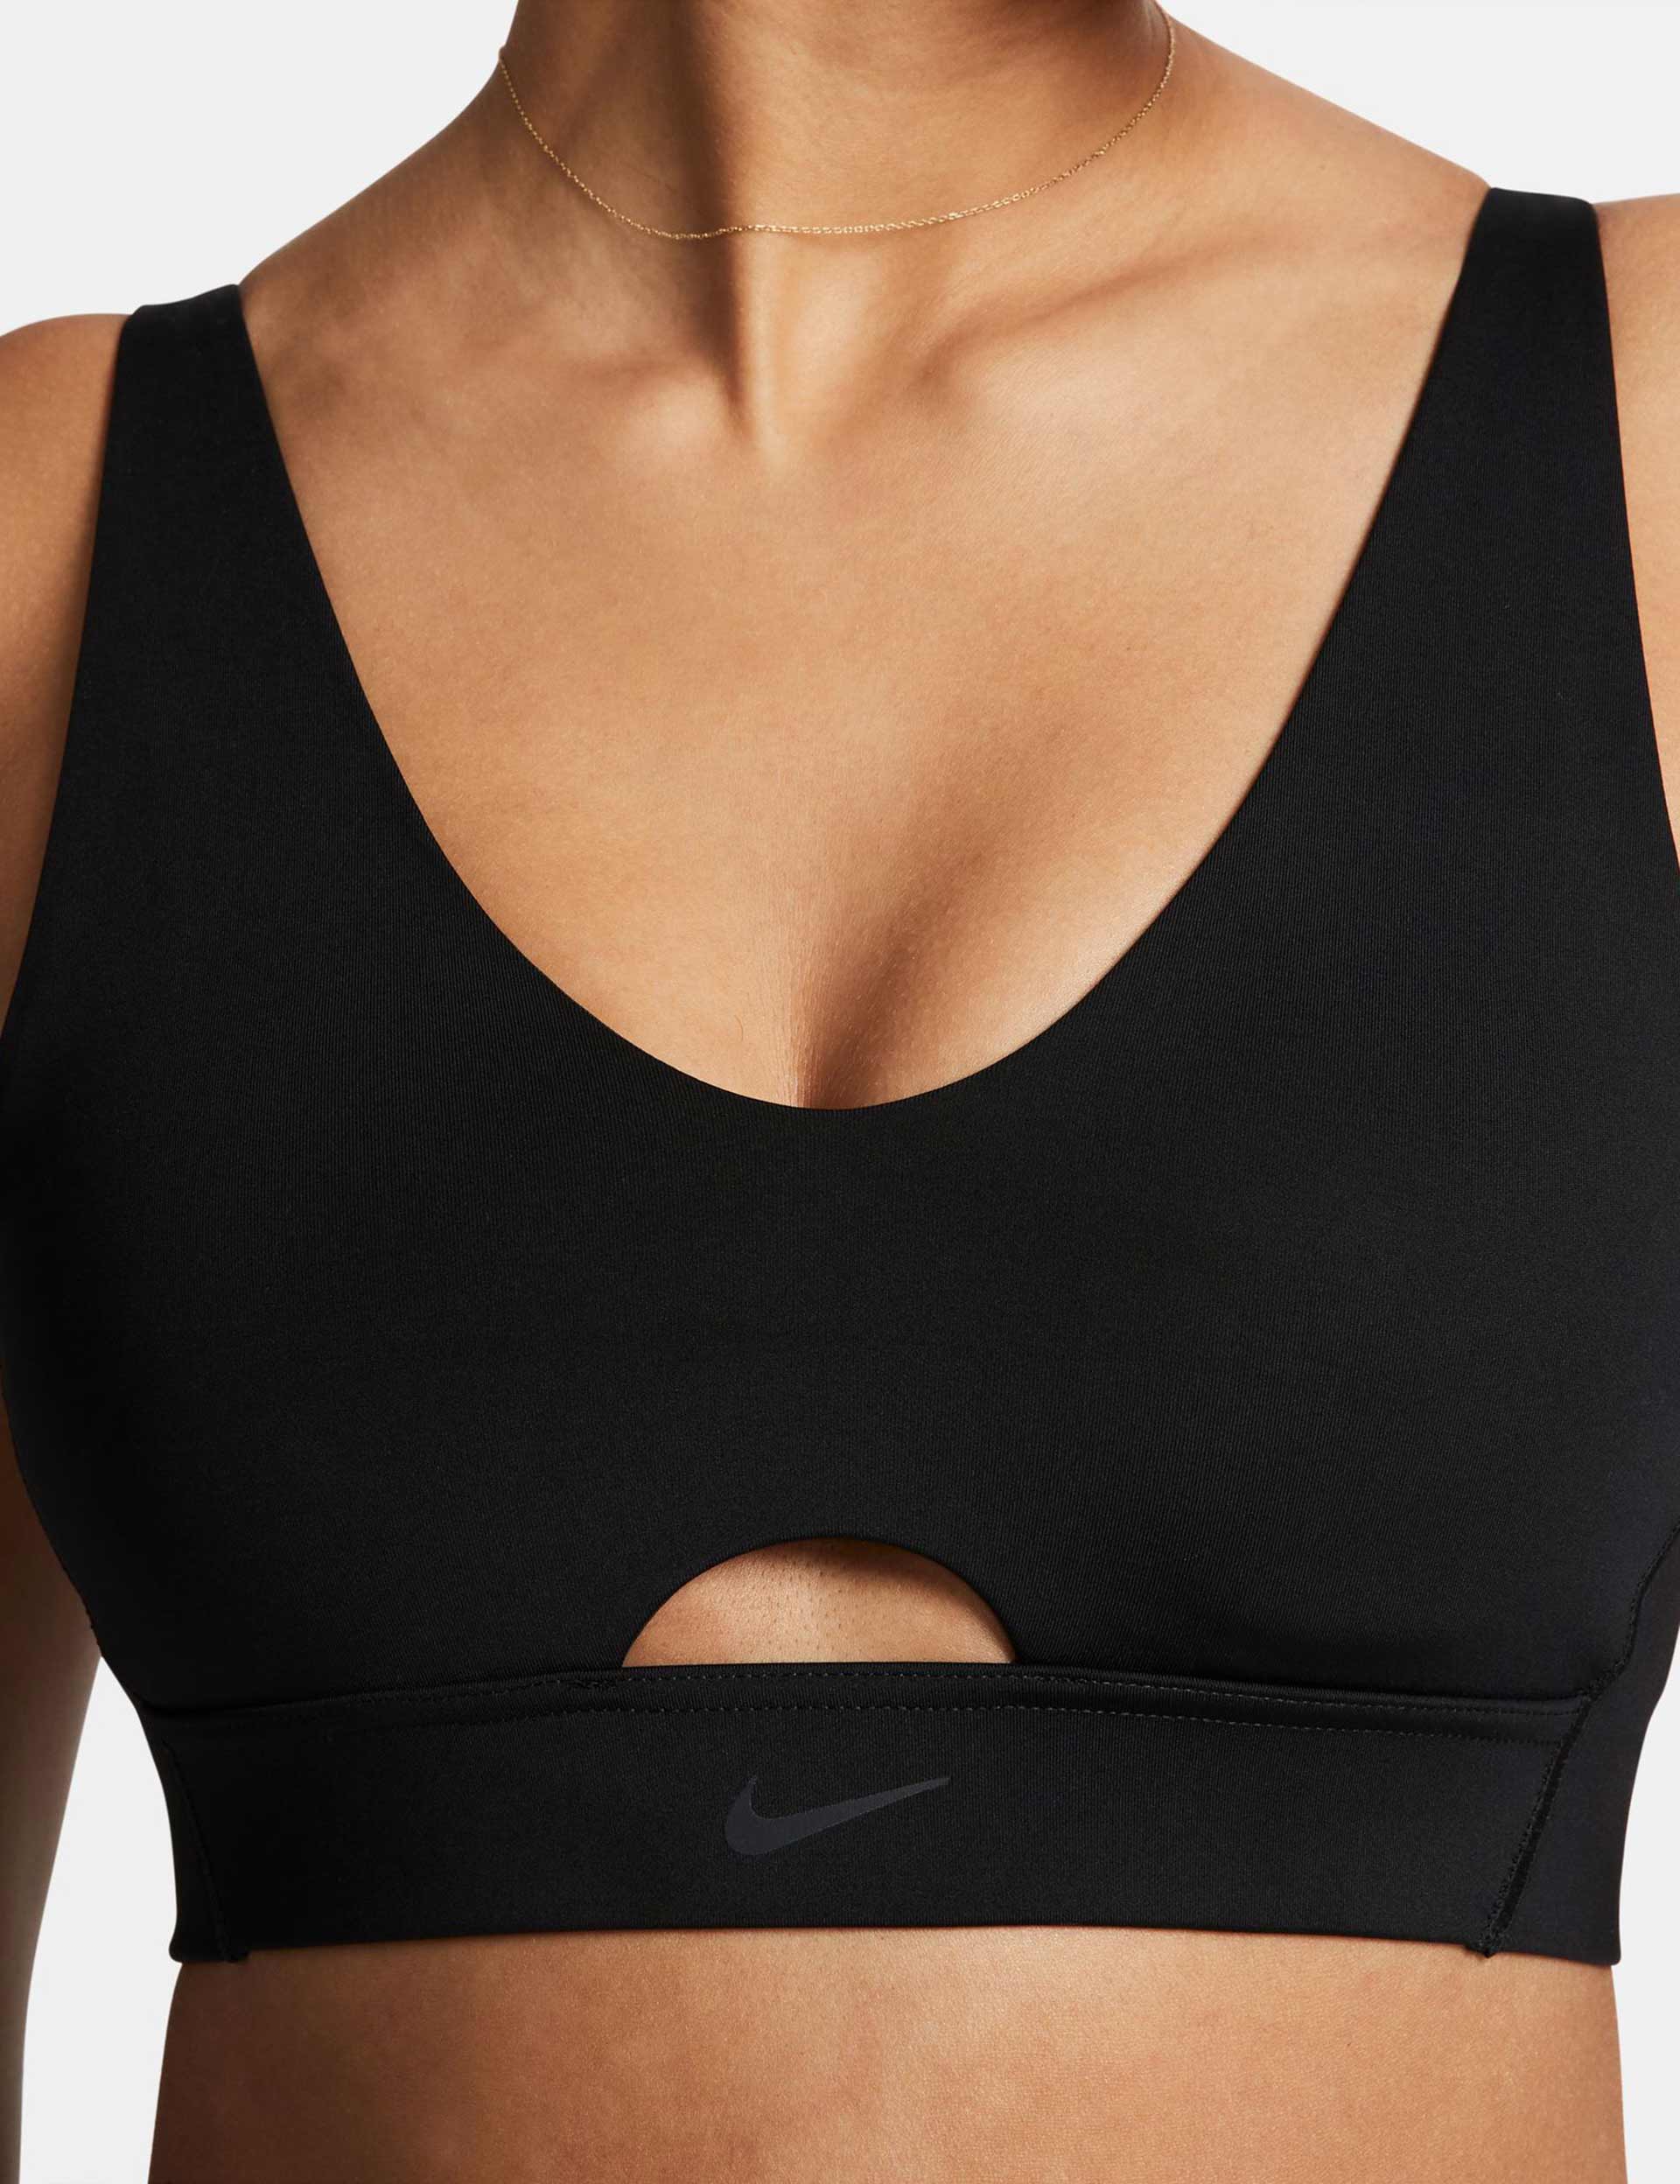 Nike Training Indy light support sports bra in gray